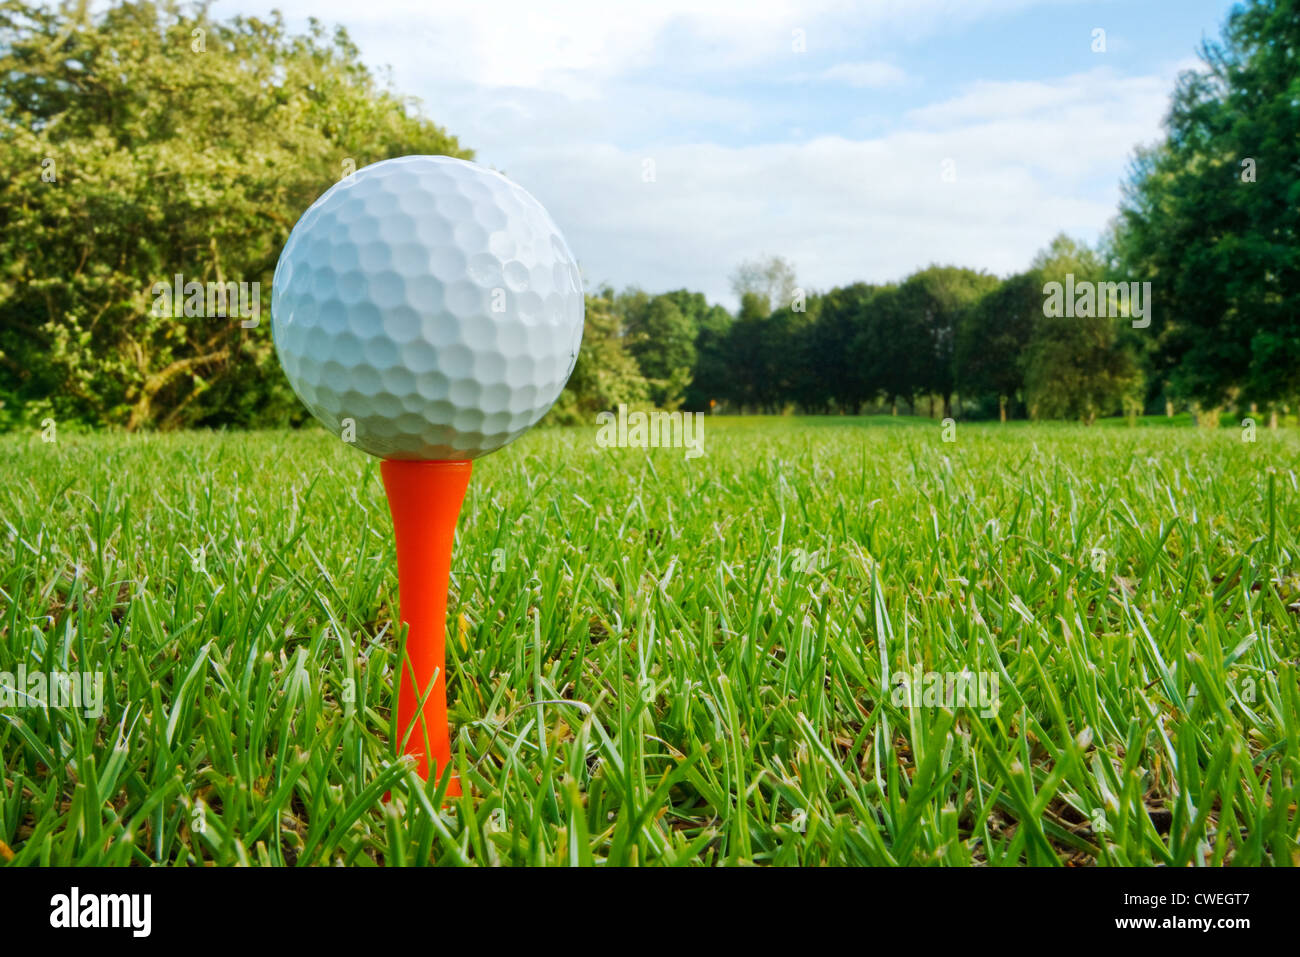 Golf ball on tee with fairway, golf course and flag in distance Stock Photo